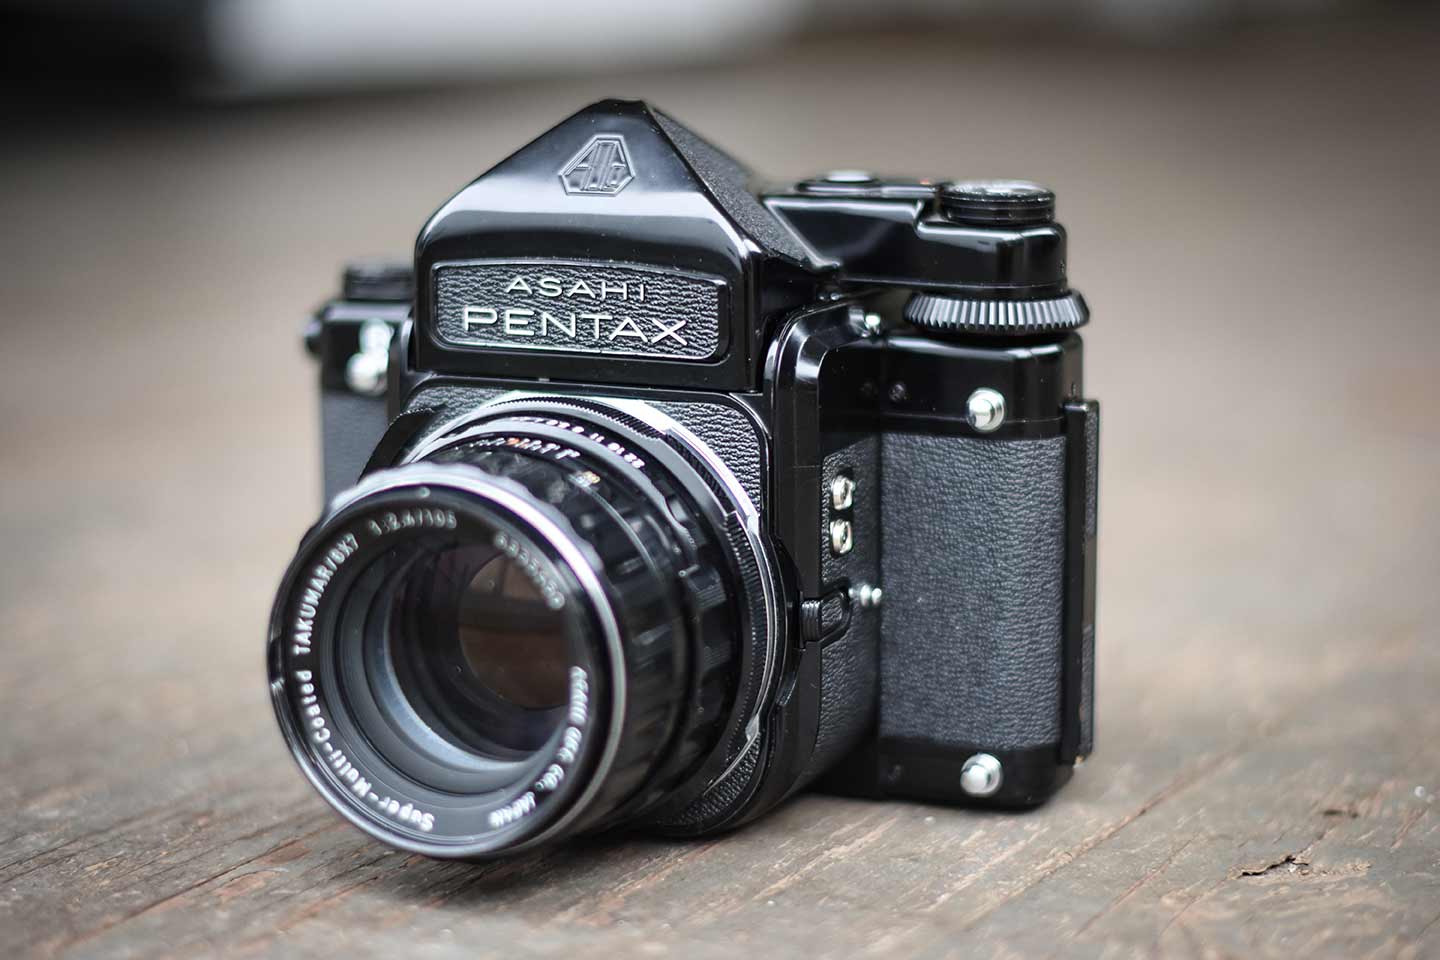 Large black camera with a lens attached, Asahi Pentax embossed on the front, a large dial on the top right side, and knobs and silver accessory mounts